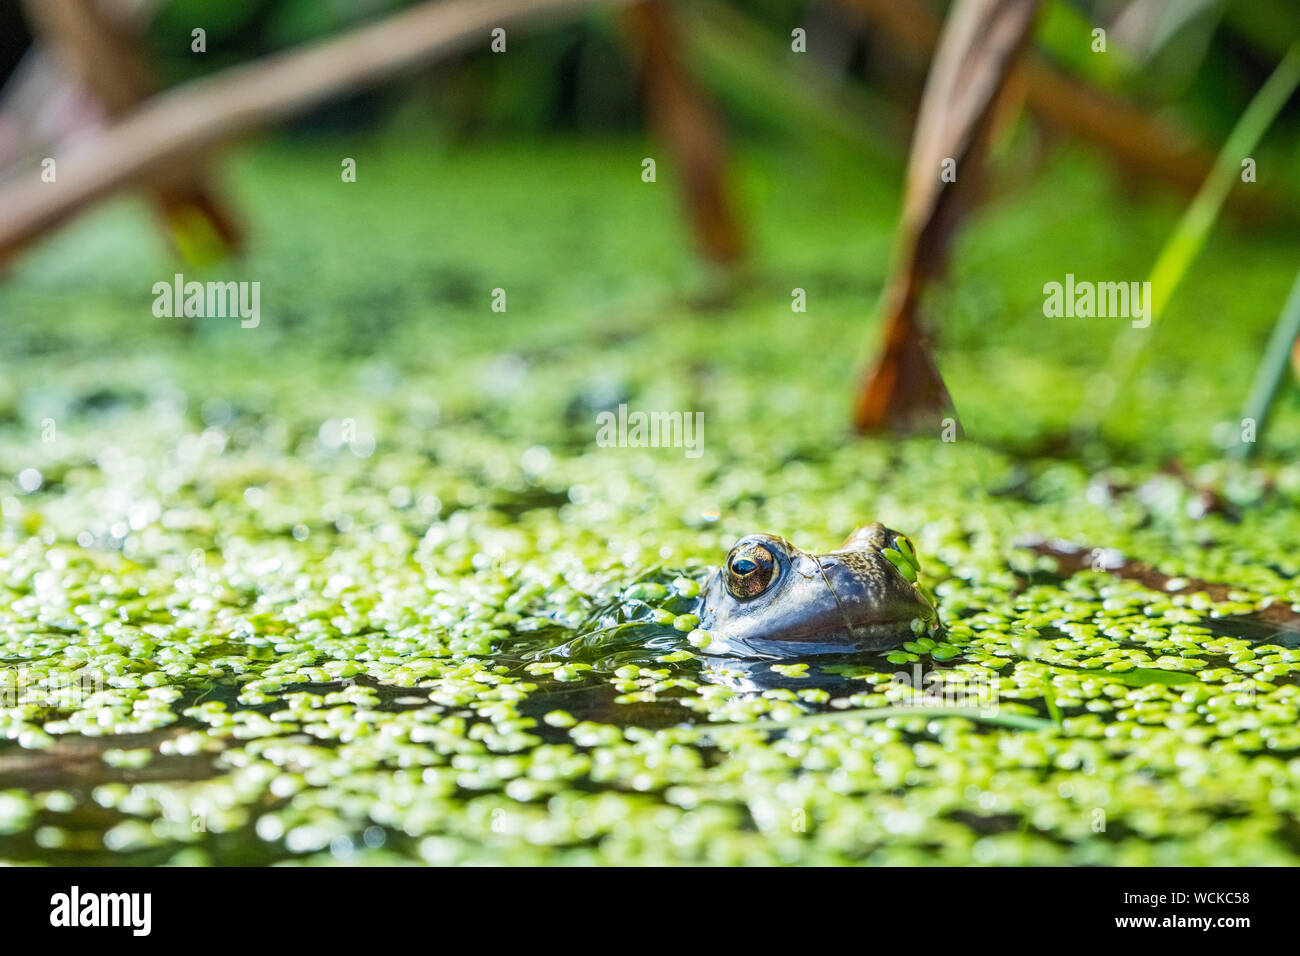 a frog in a British garden pond Stock Photo